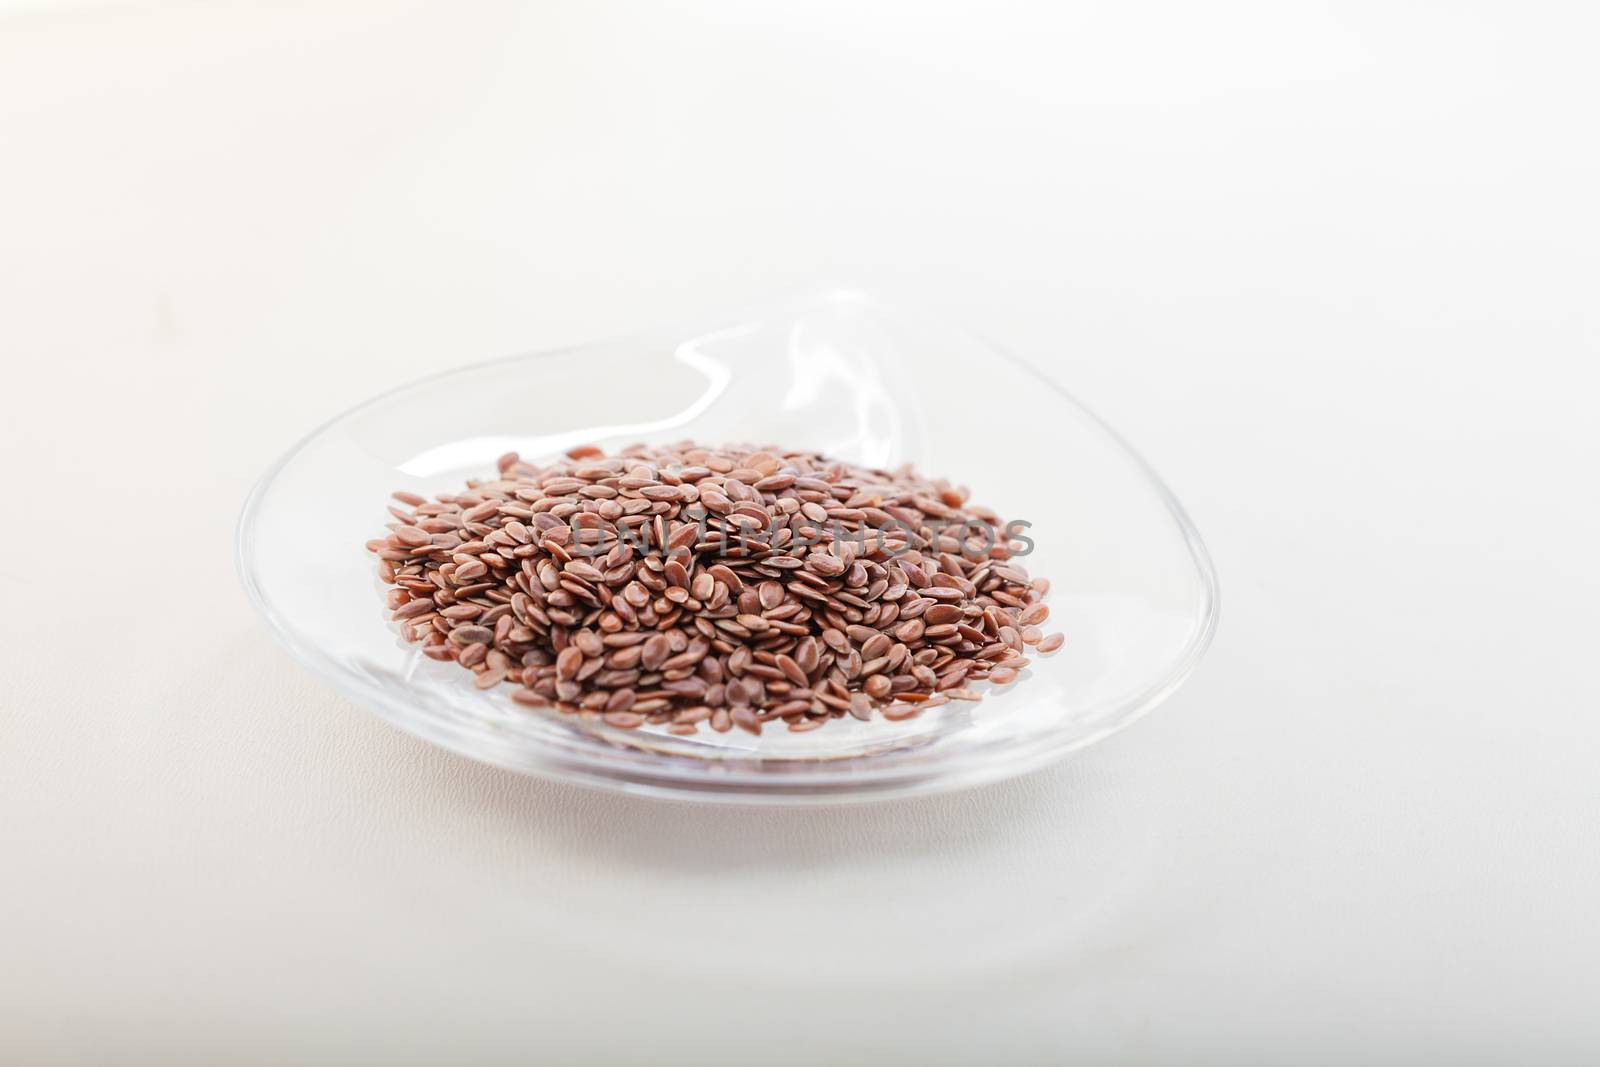 Flax seed in glass bowl on a white surface